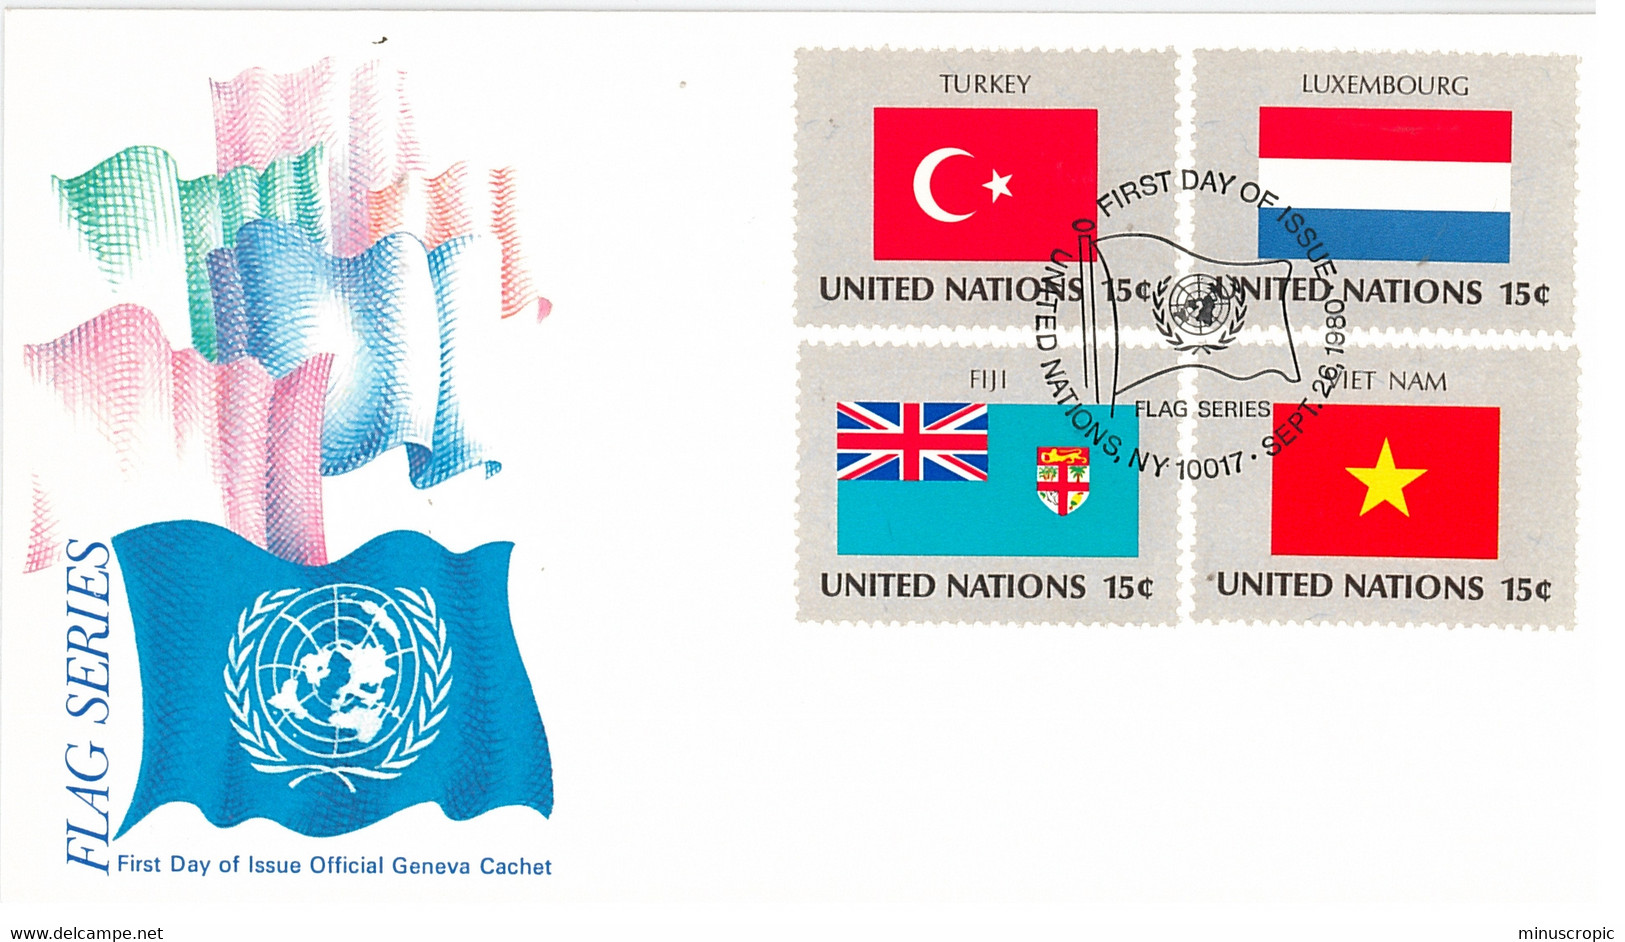 Enveloppe FDC United Nations - Flag Series - 1980 - Turkey - Luxembourg - Fiji - Viet Nam - Covers & Documents